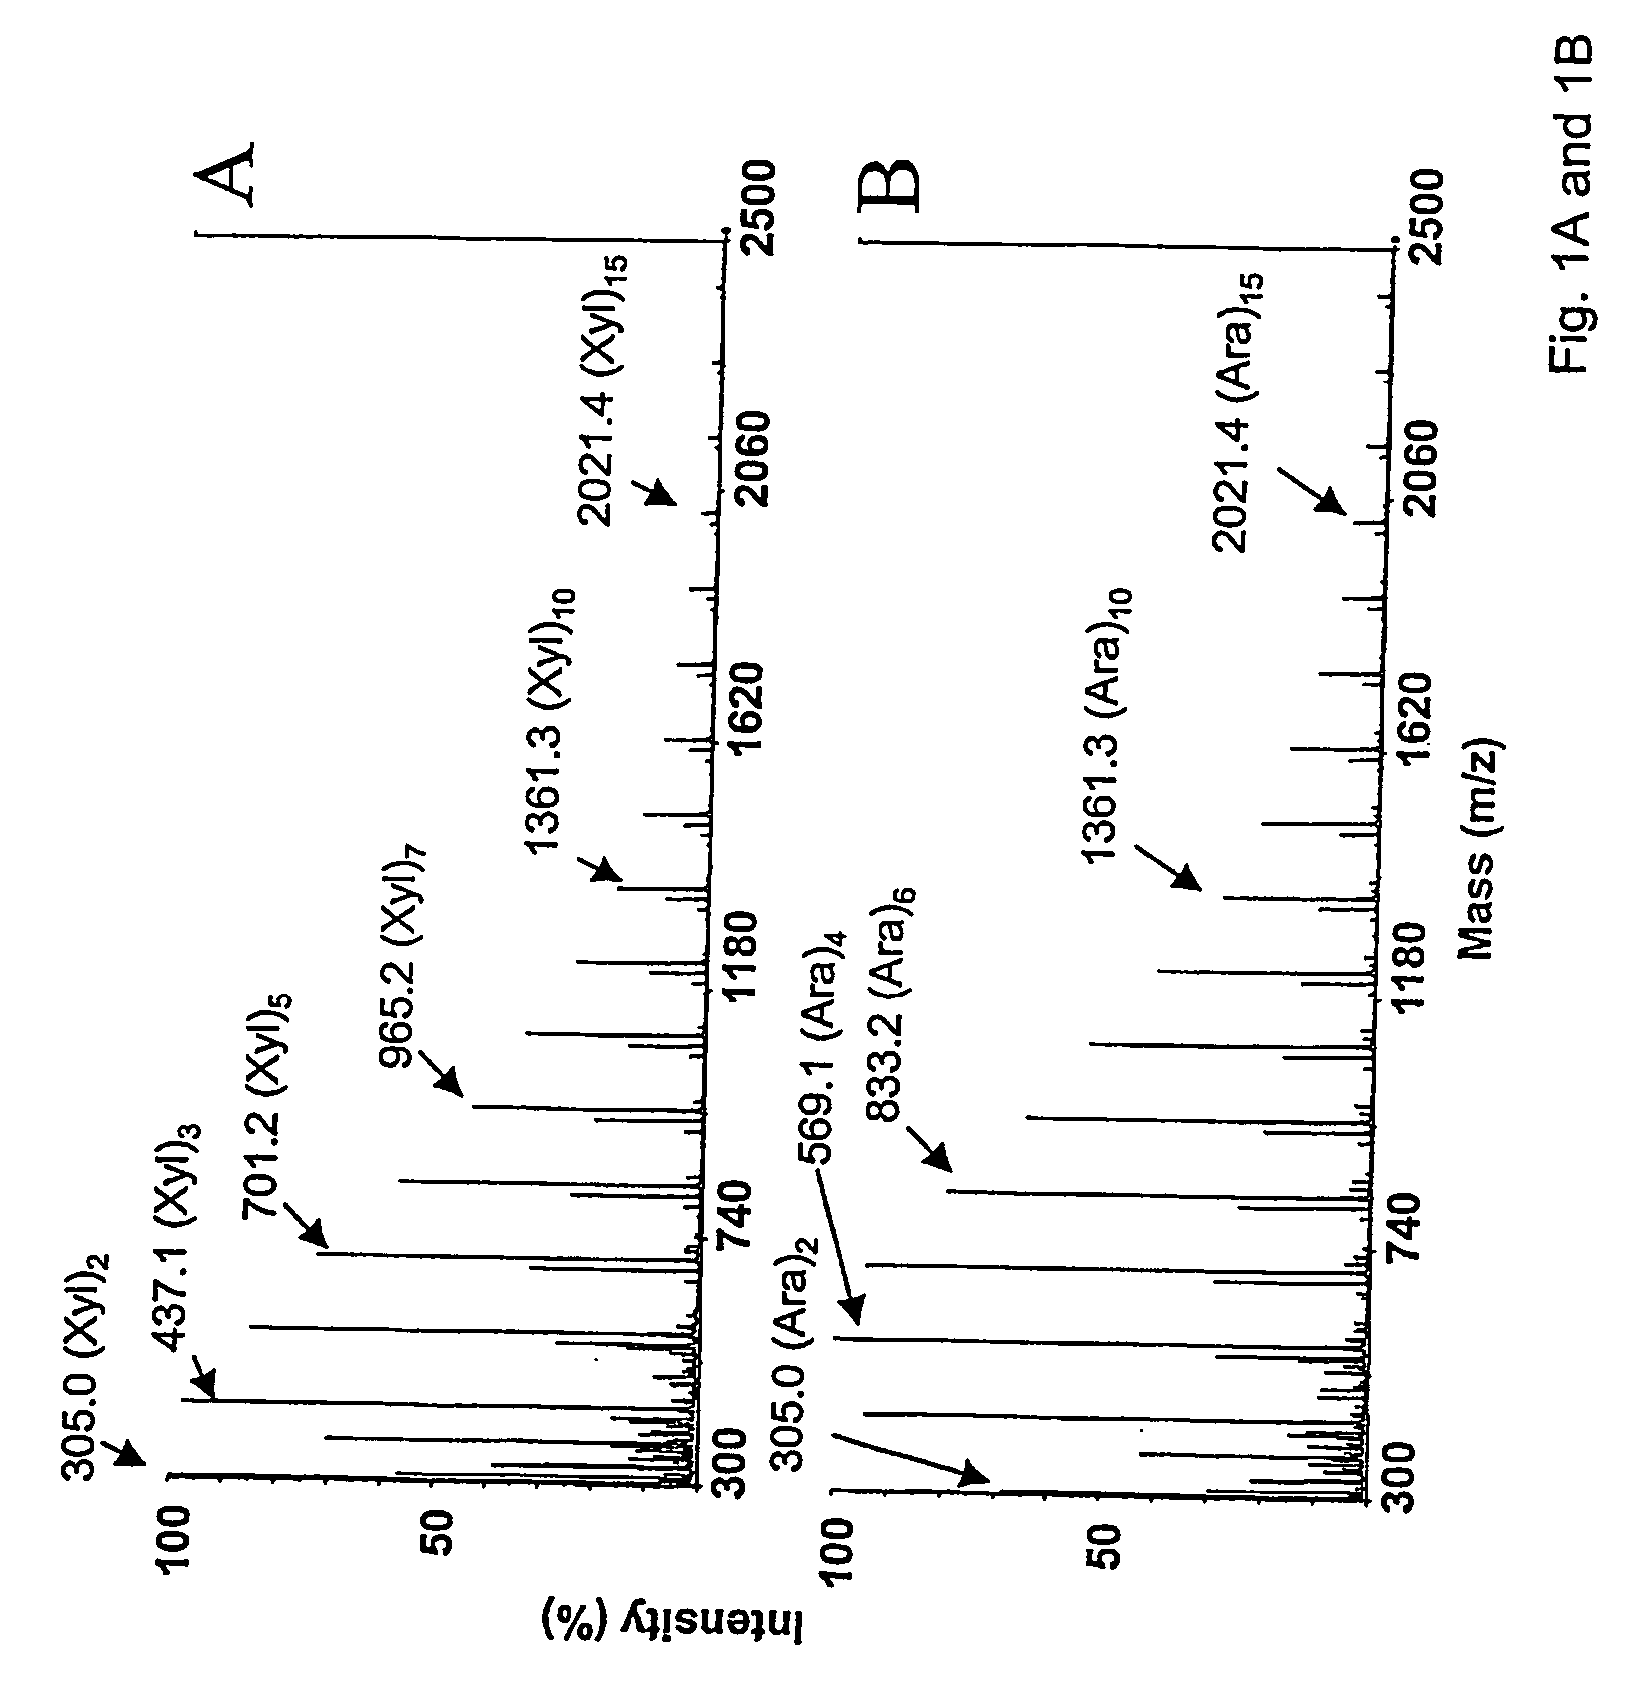 Novel carbohydrate compositions and a process of preparing same